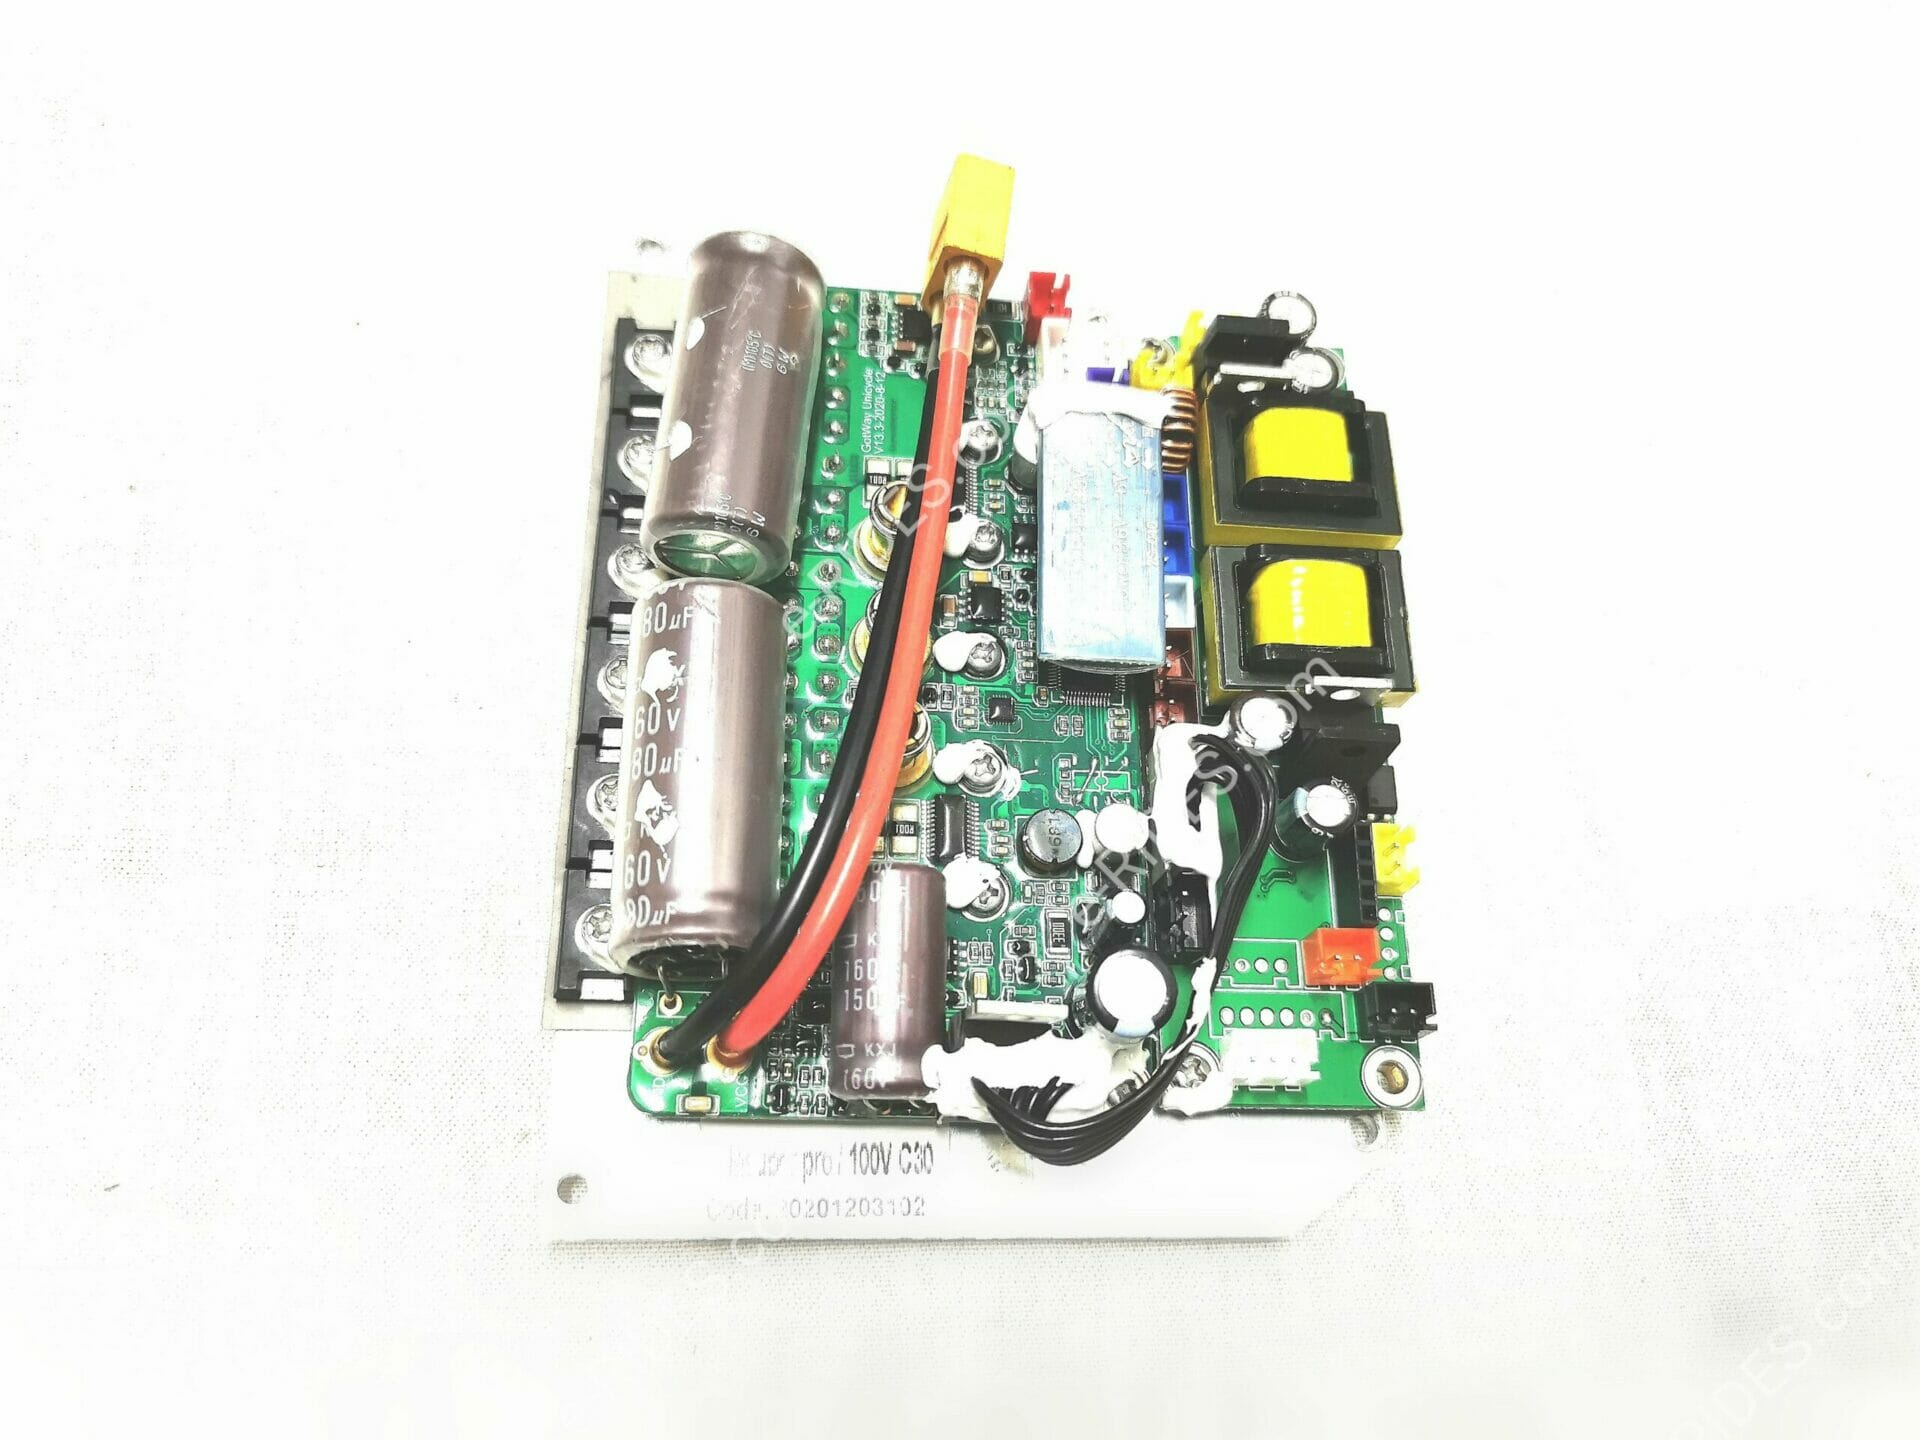 Begode Gotway Monster Pro electric unicycle mainboard Speed Version C30